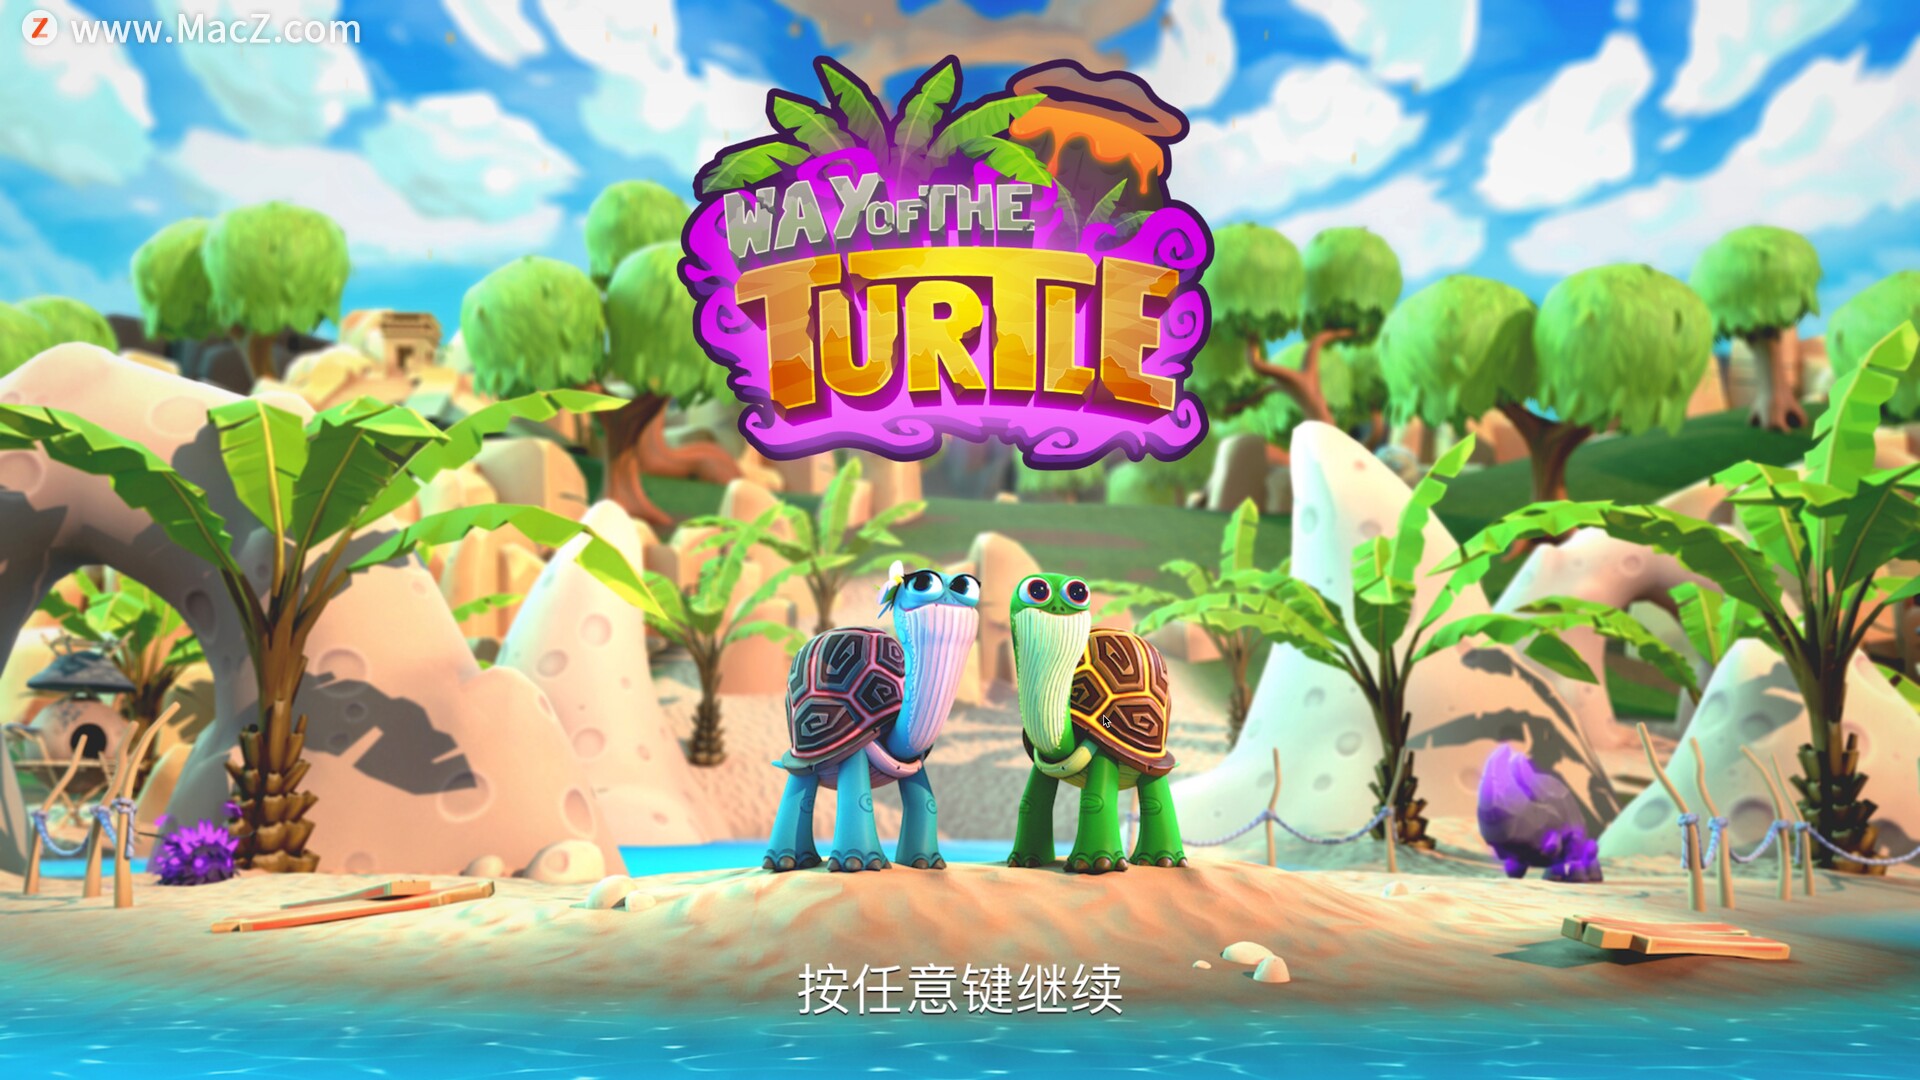 Way of the Turtle for Mac(小乌龟的冒险)  700 MB 简体中文